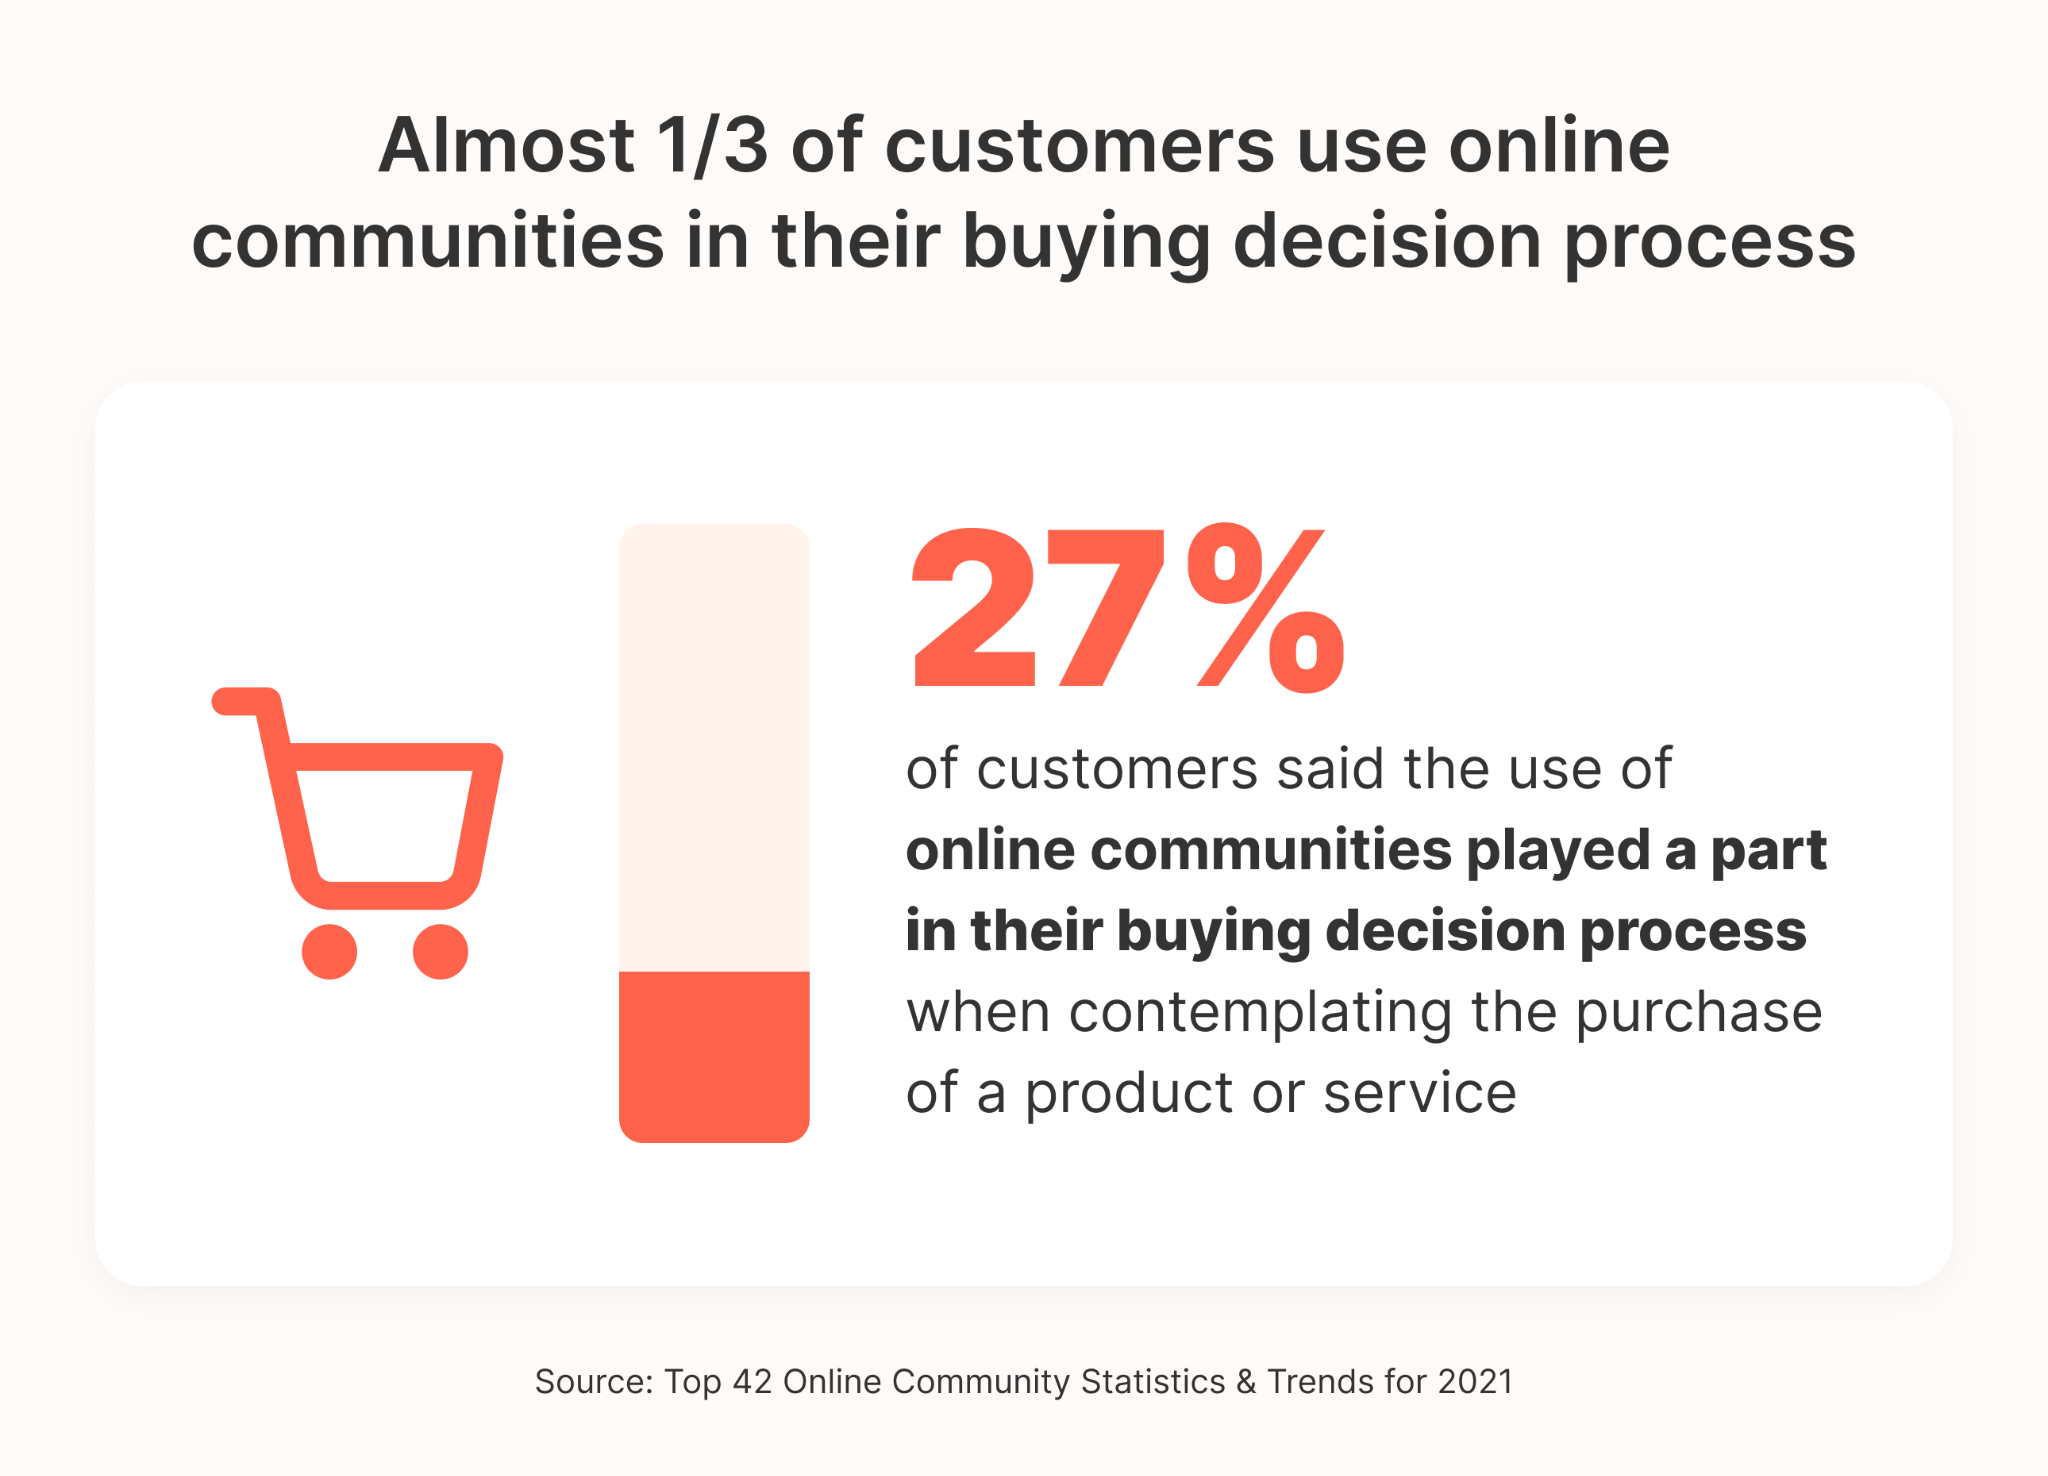 The importance of an online community for the purchasing decision